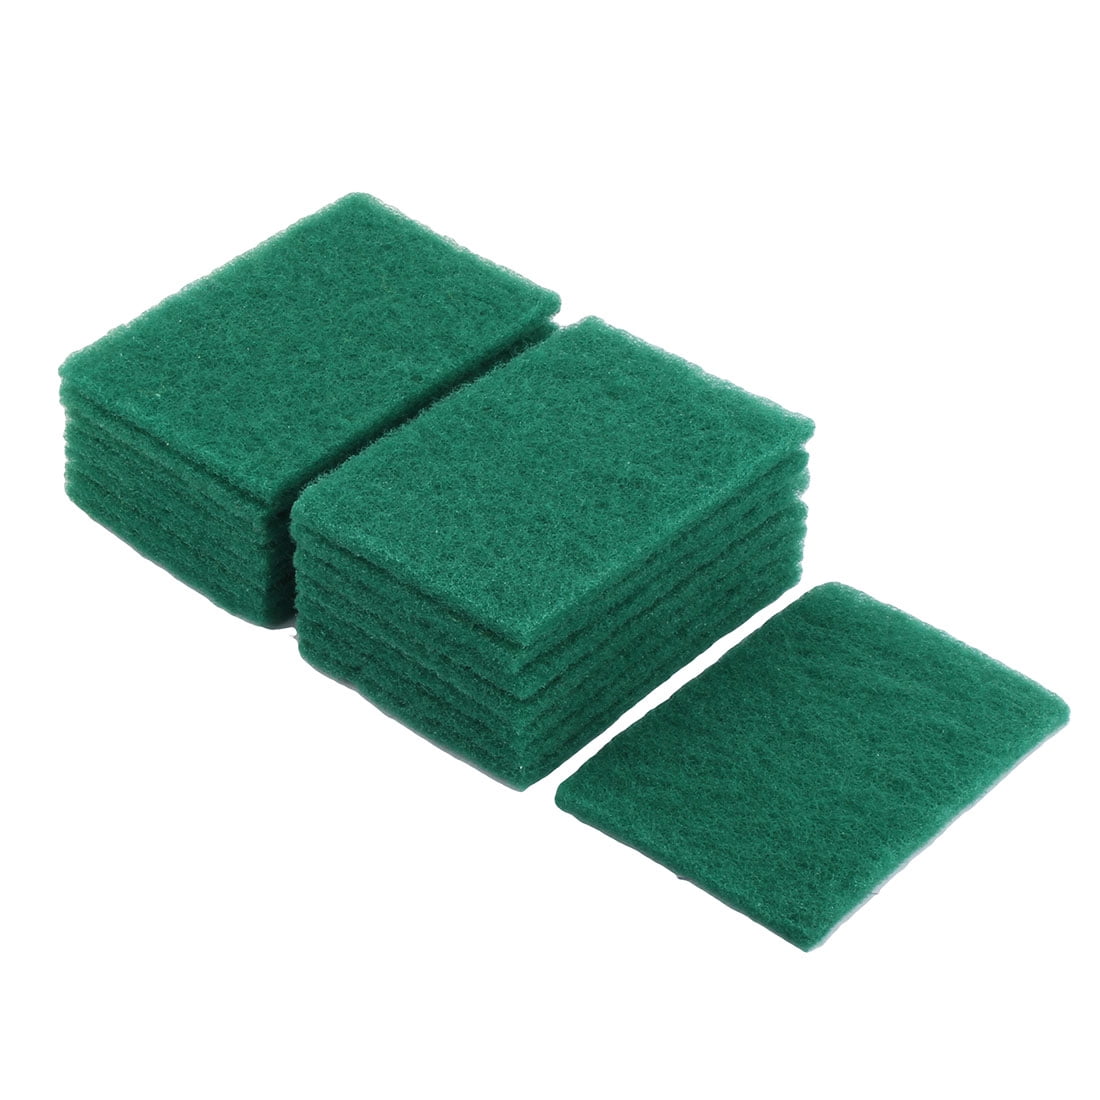 Details about   15 Sponge Scouring Pads Kitchen Dishes Cleaner Scour Scrub Cleanning Wholesale ! 